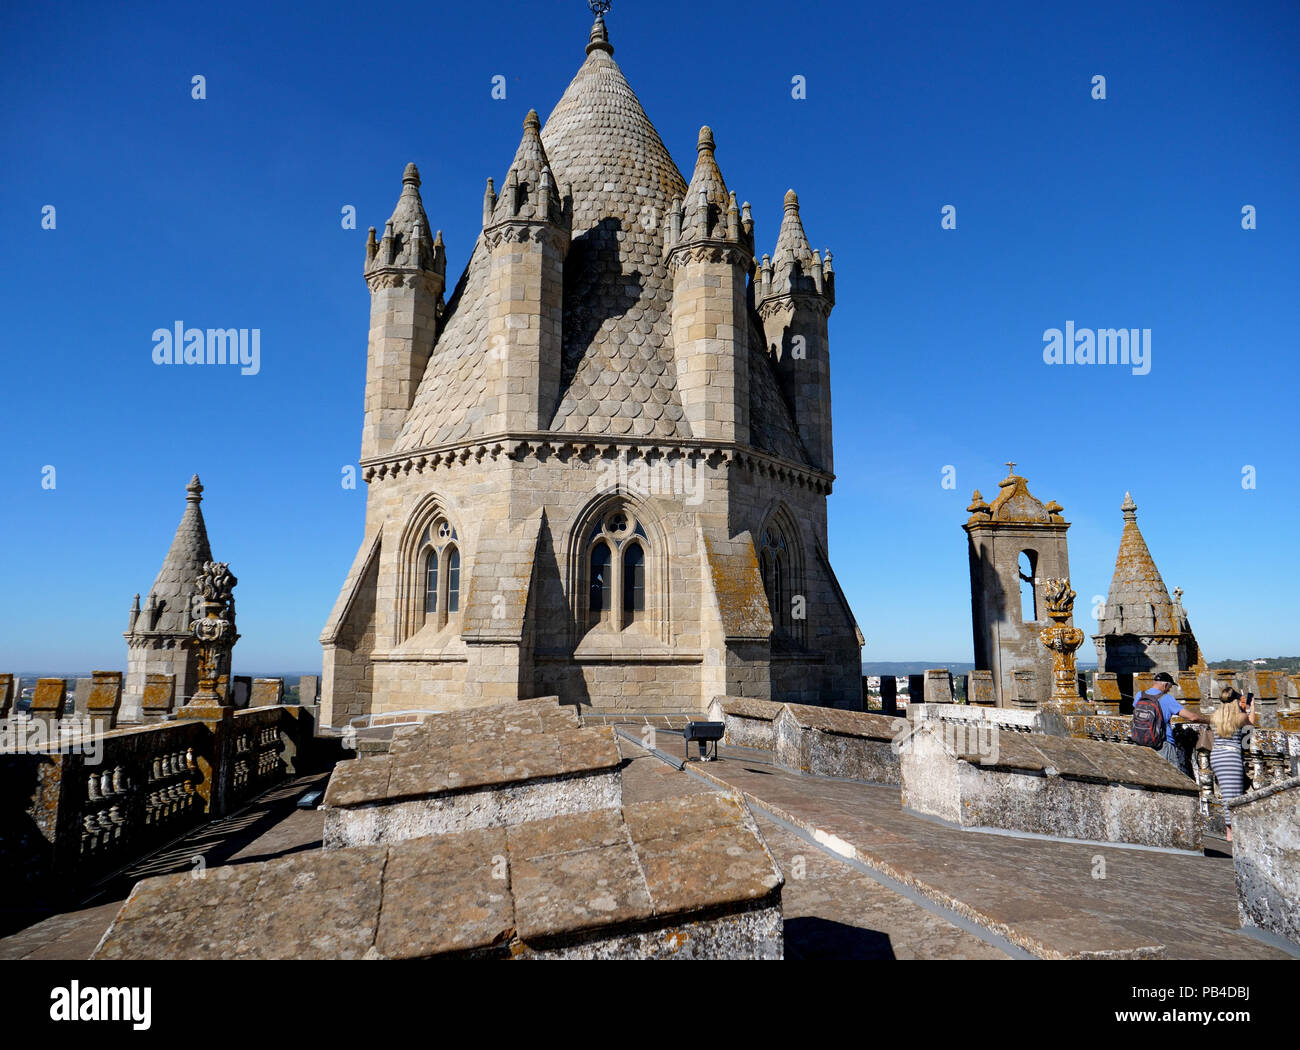 The massive 12-century gothic Cathedral of the city of Evora in the Alentejo region of Portugal Stock Photo